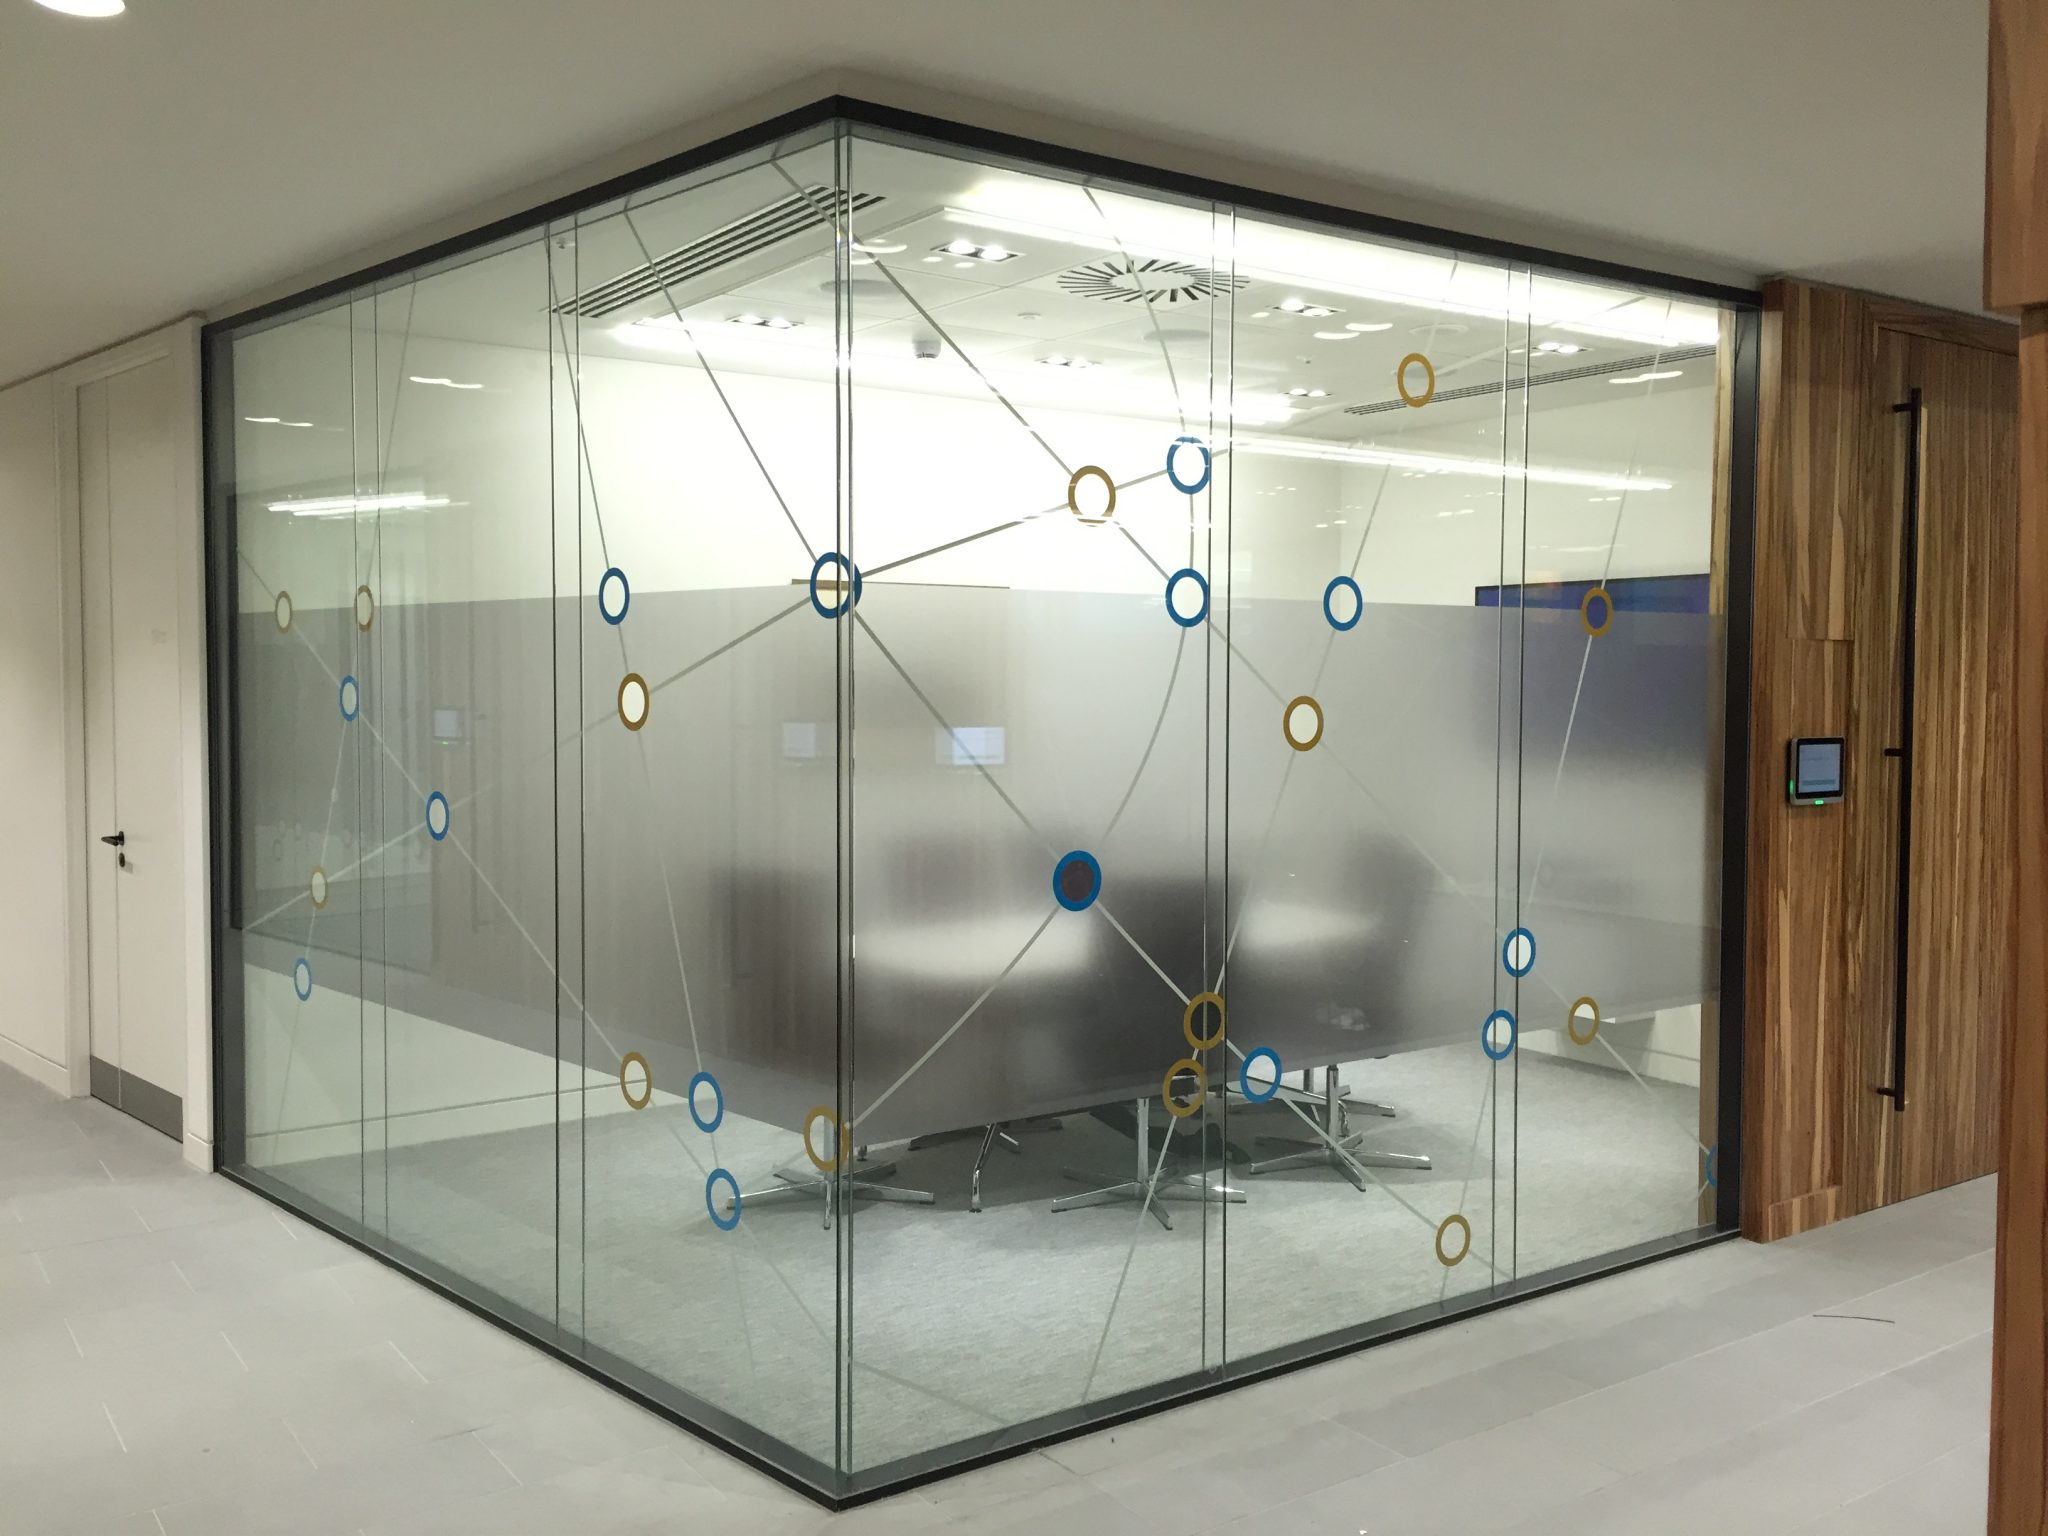 small image of window graphics on office glass walls